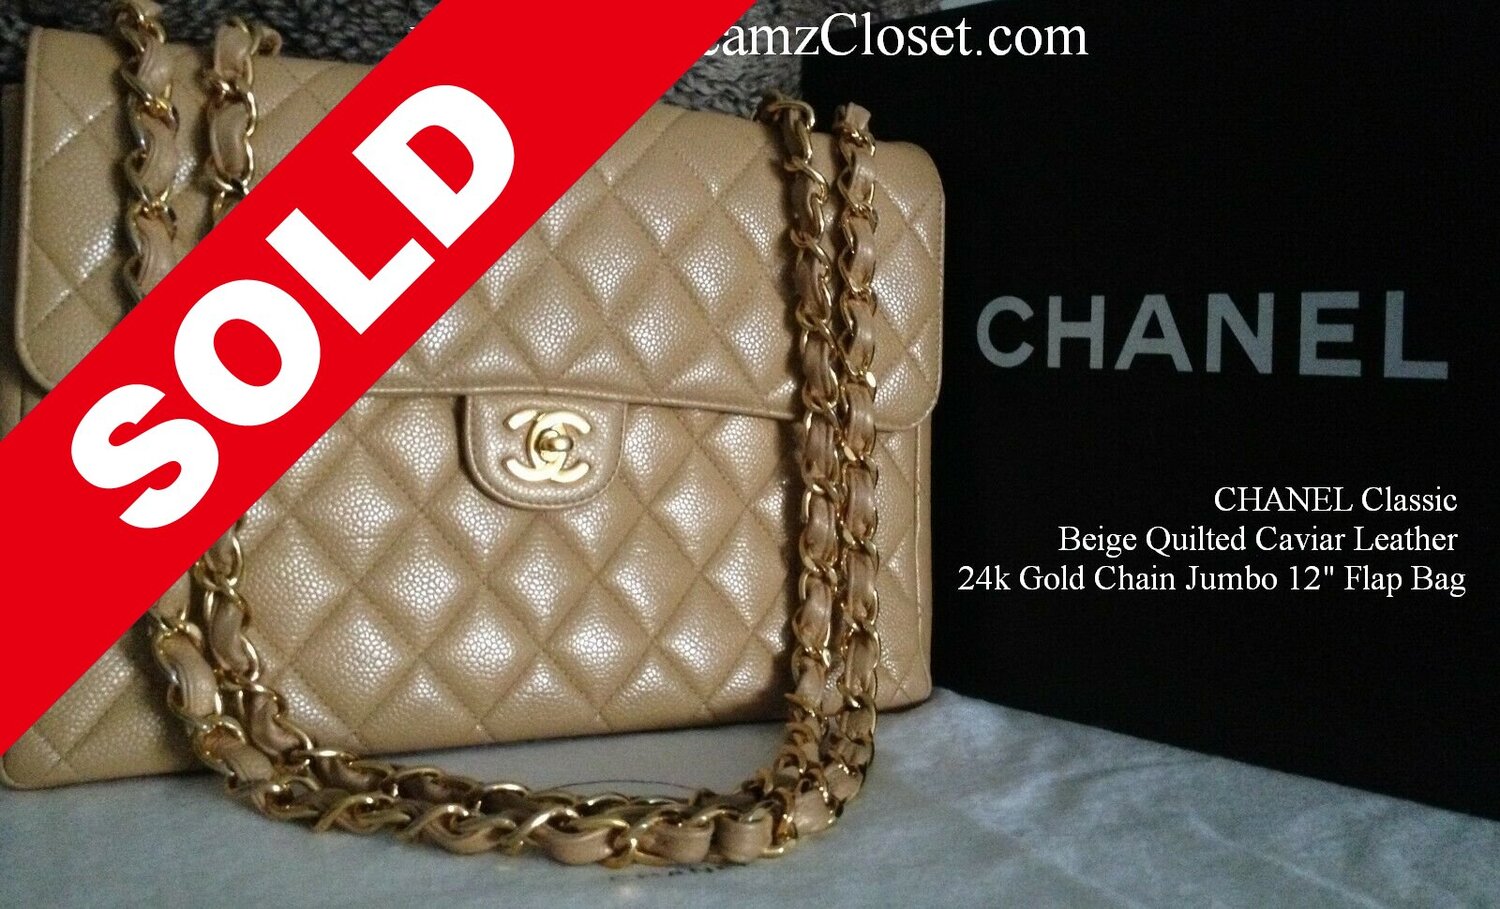 CHANEL Classic Beige Quilted Caviar Leather 24k Gold Chain